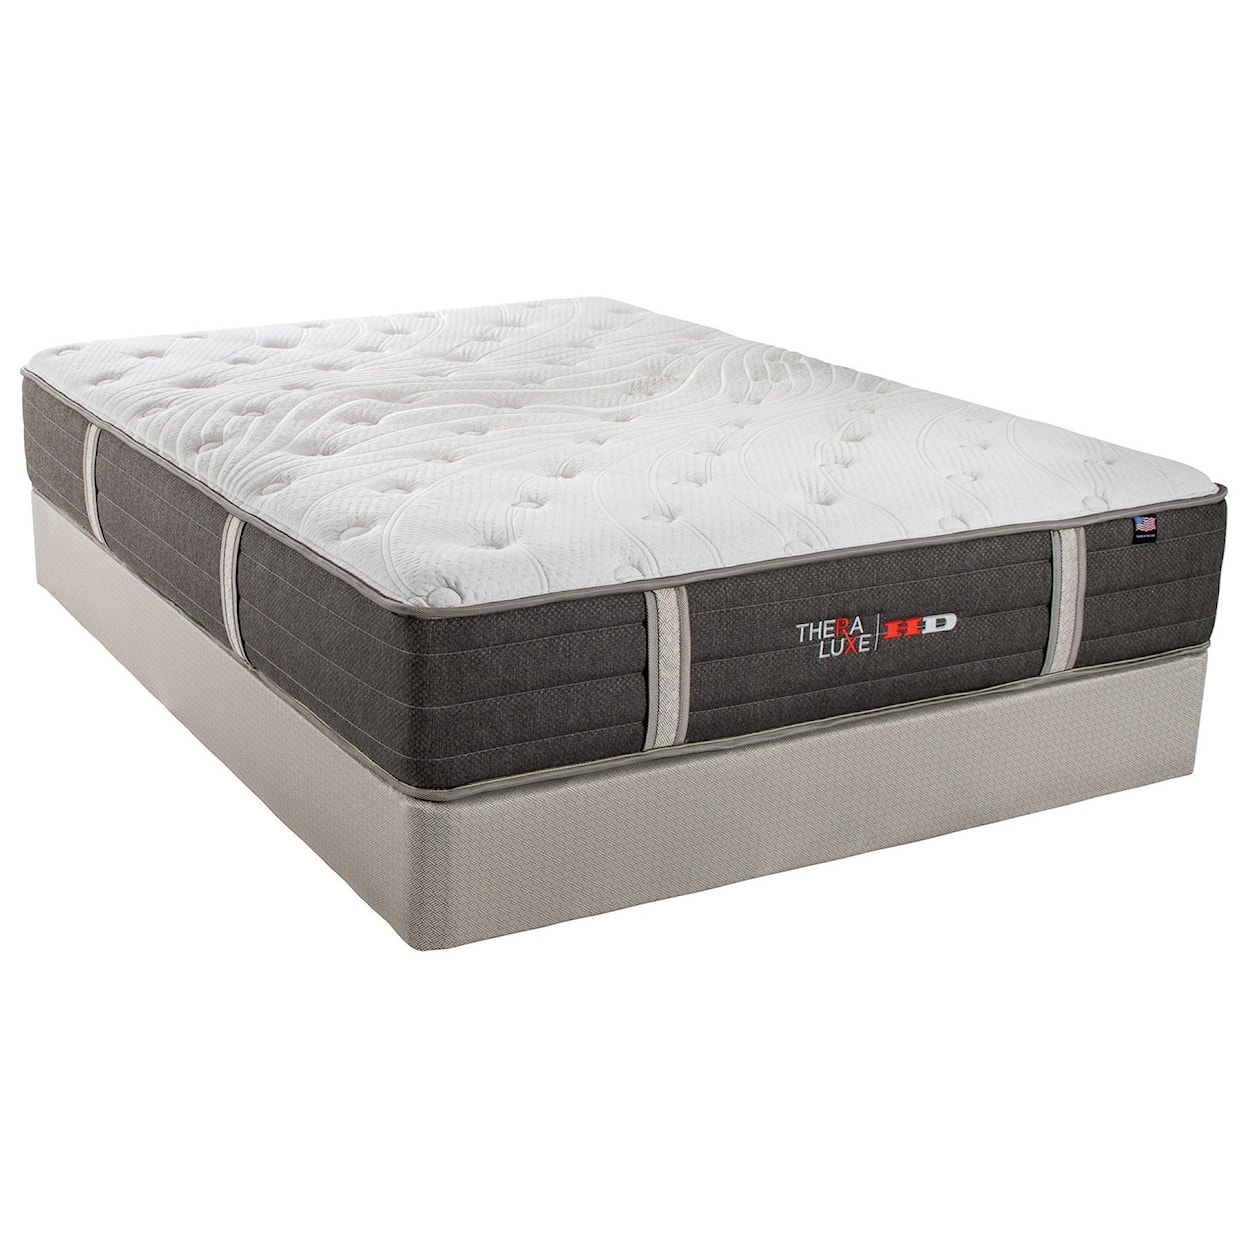 Therapedic Theraluxe Aspen Twin XL Firm Pocketed Coil Mattress Set